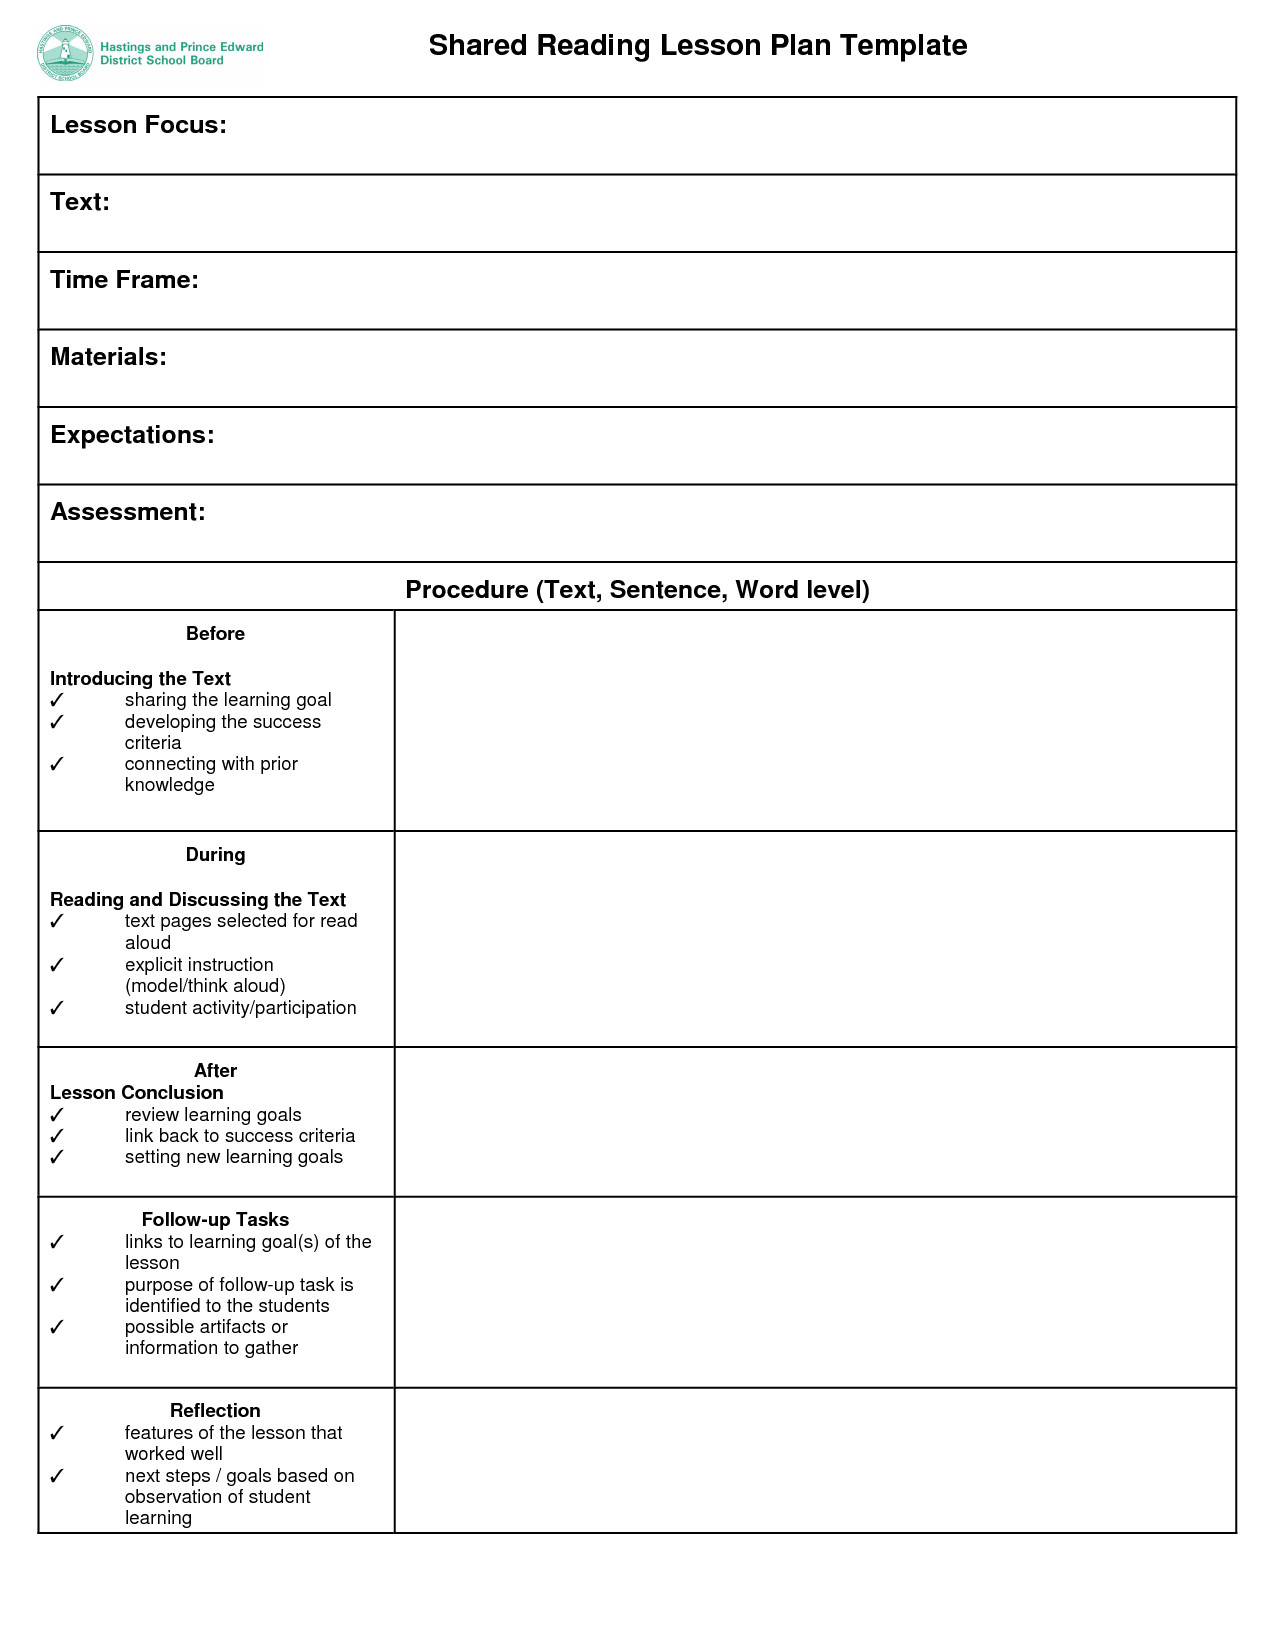 Shared Reading Lesson Plan D Reading Lesson Plan Template